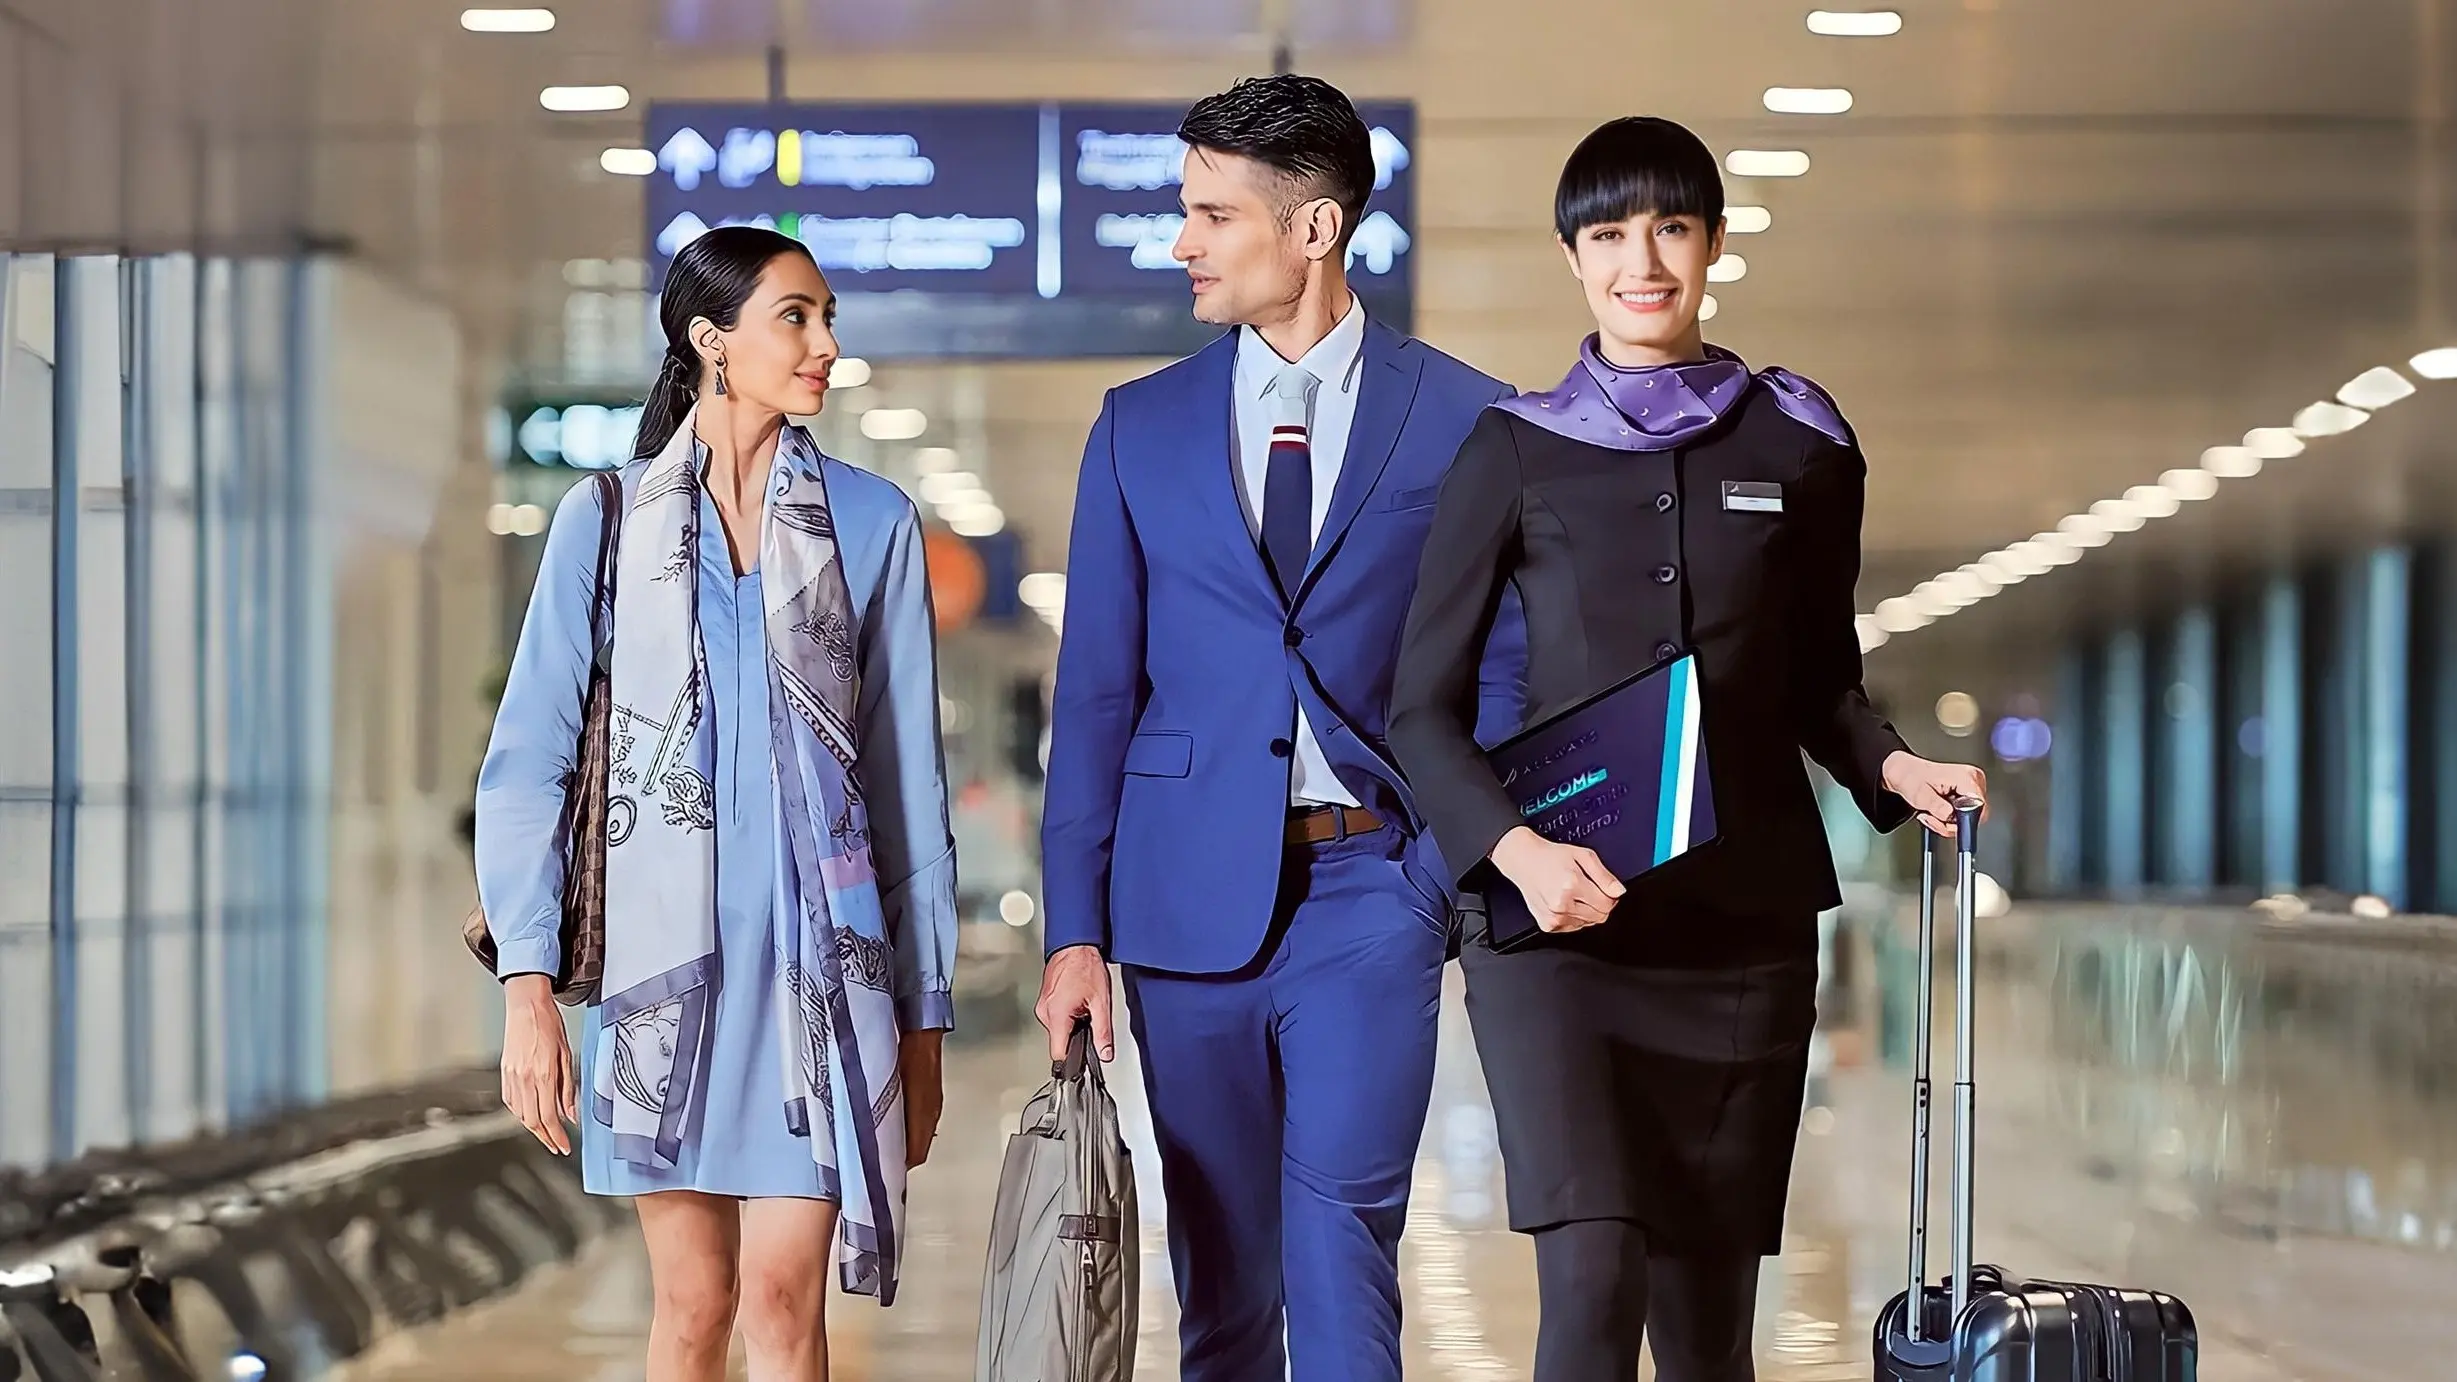 Airport Transit Meet and greet service India